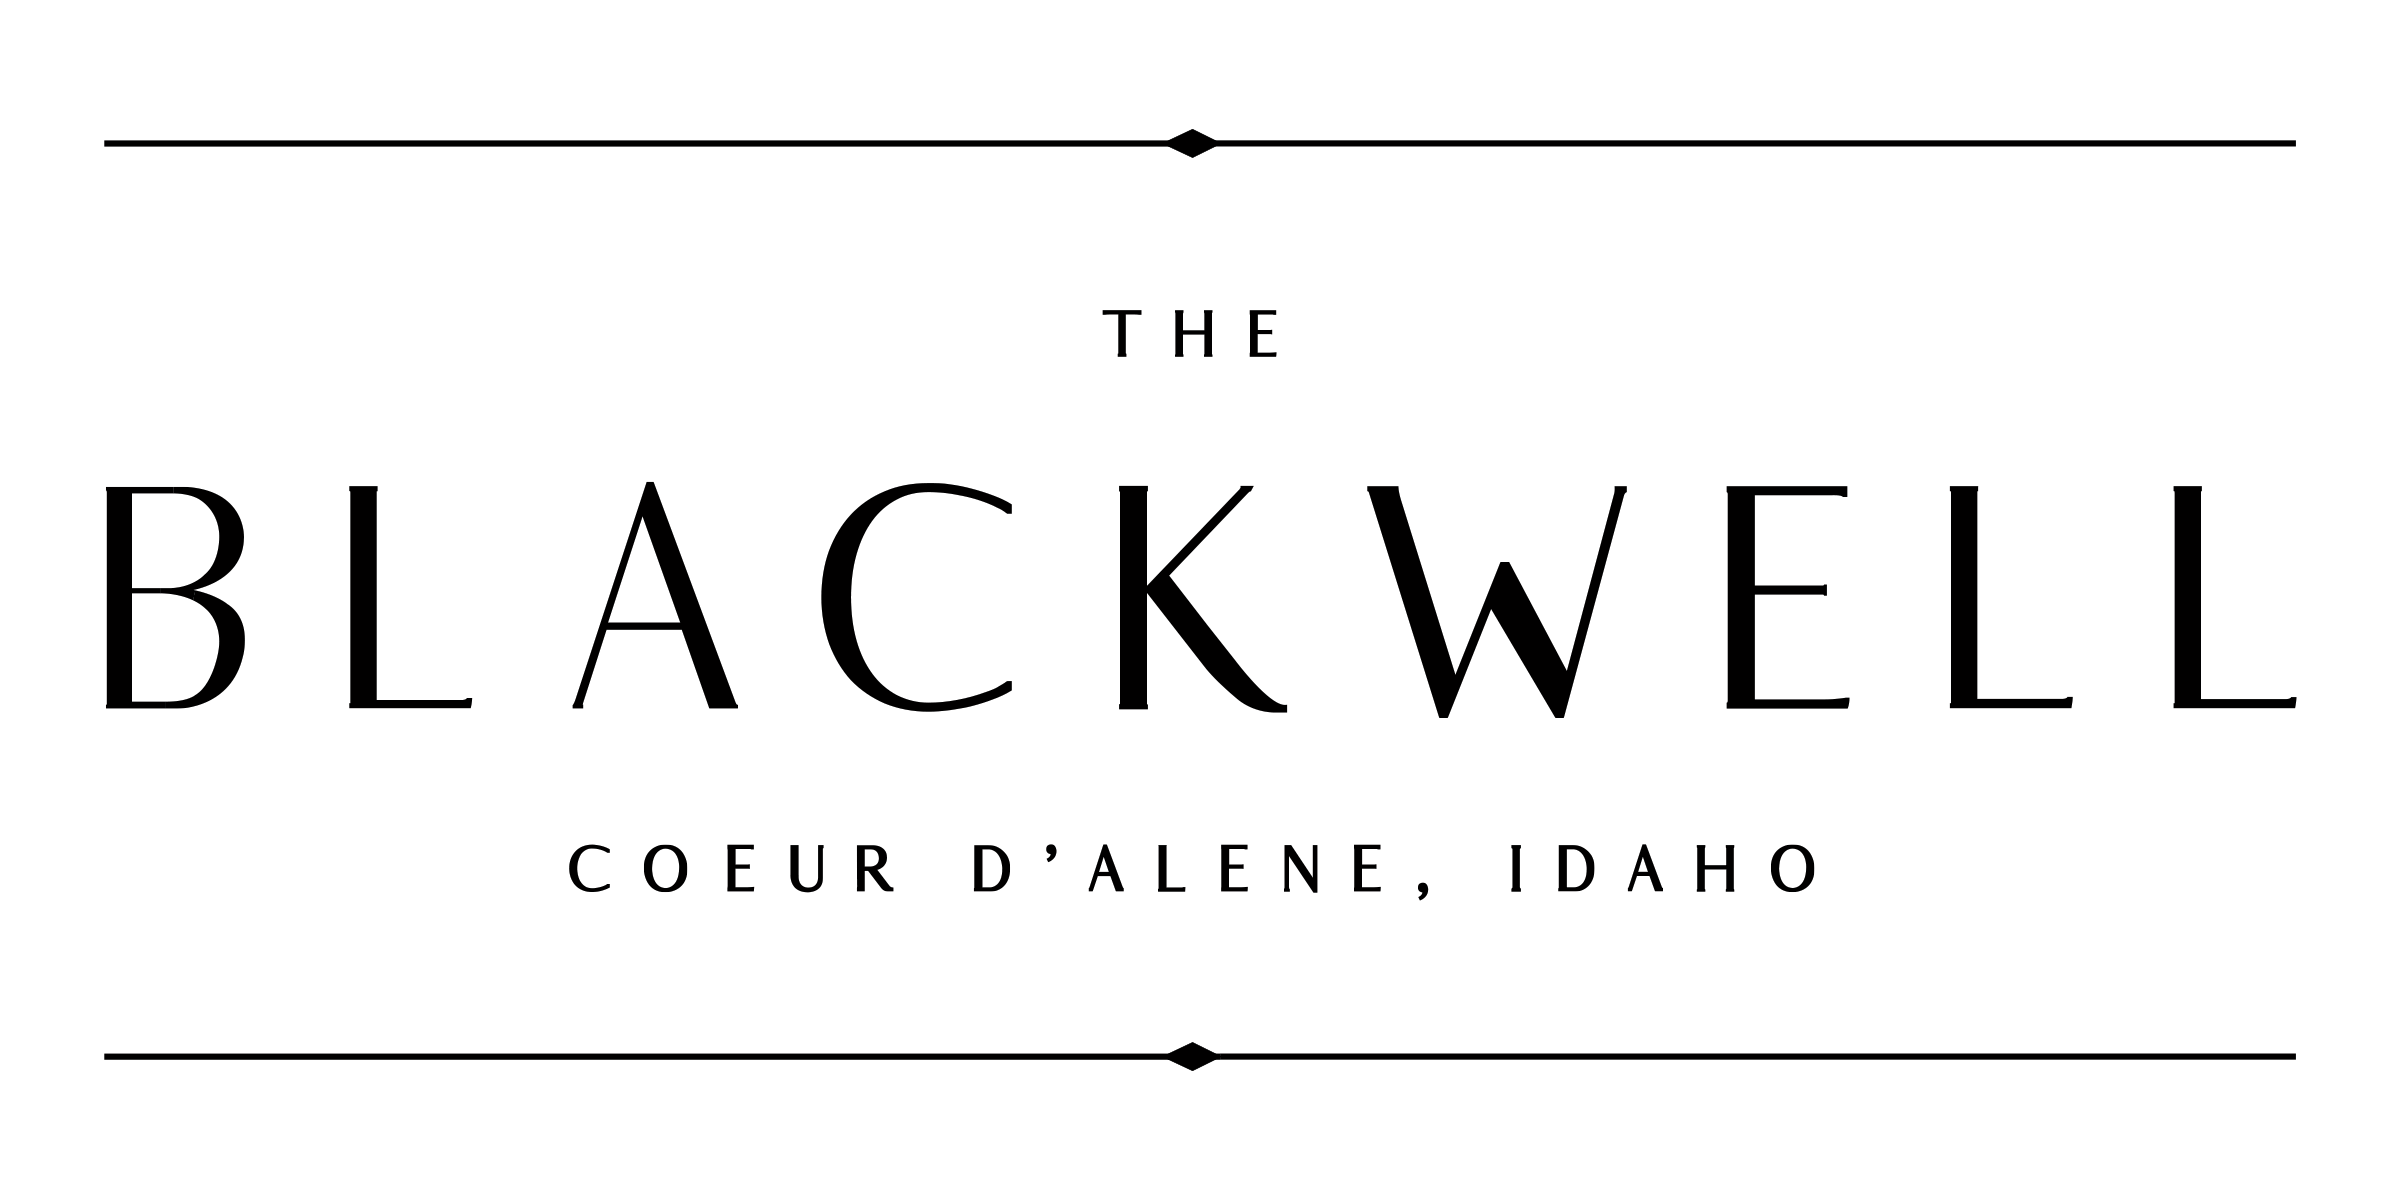 The Blackwell